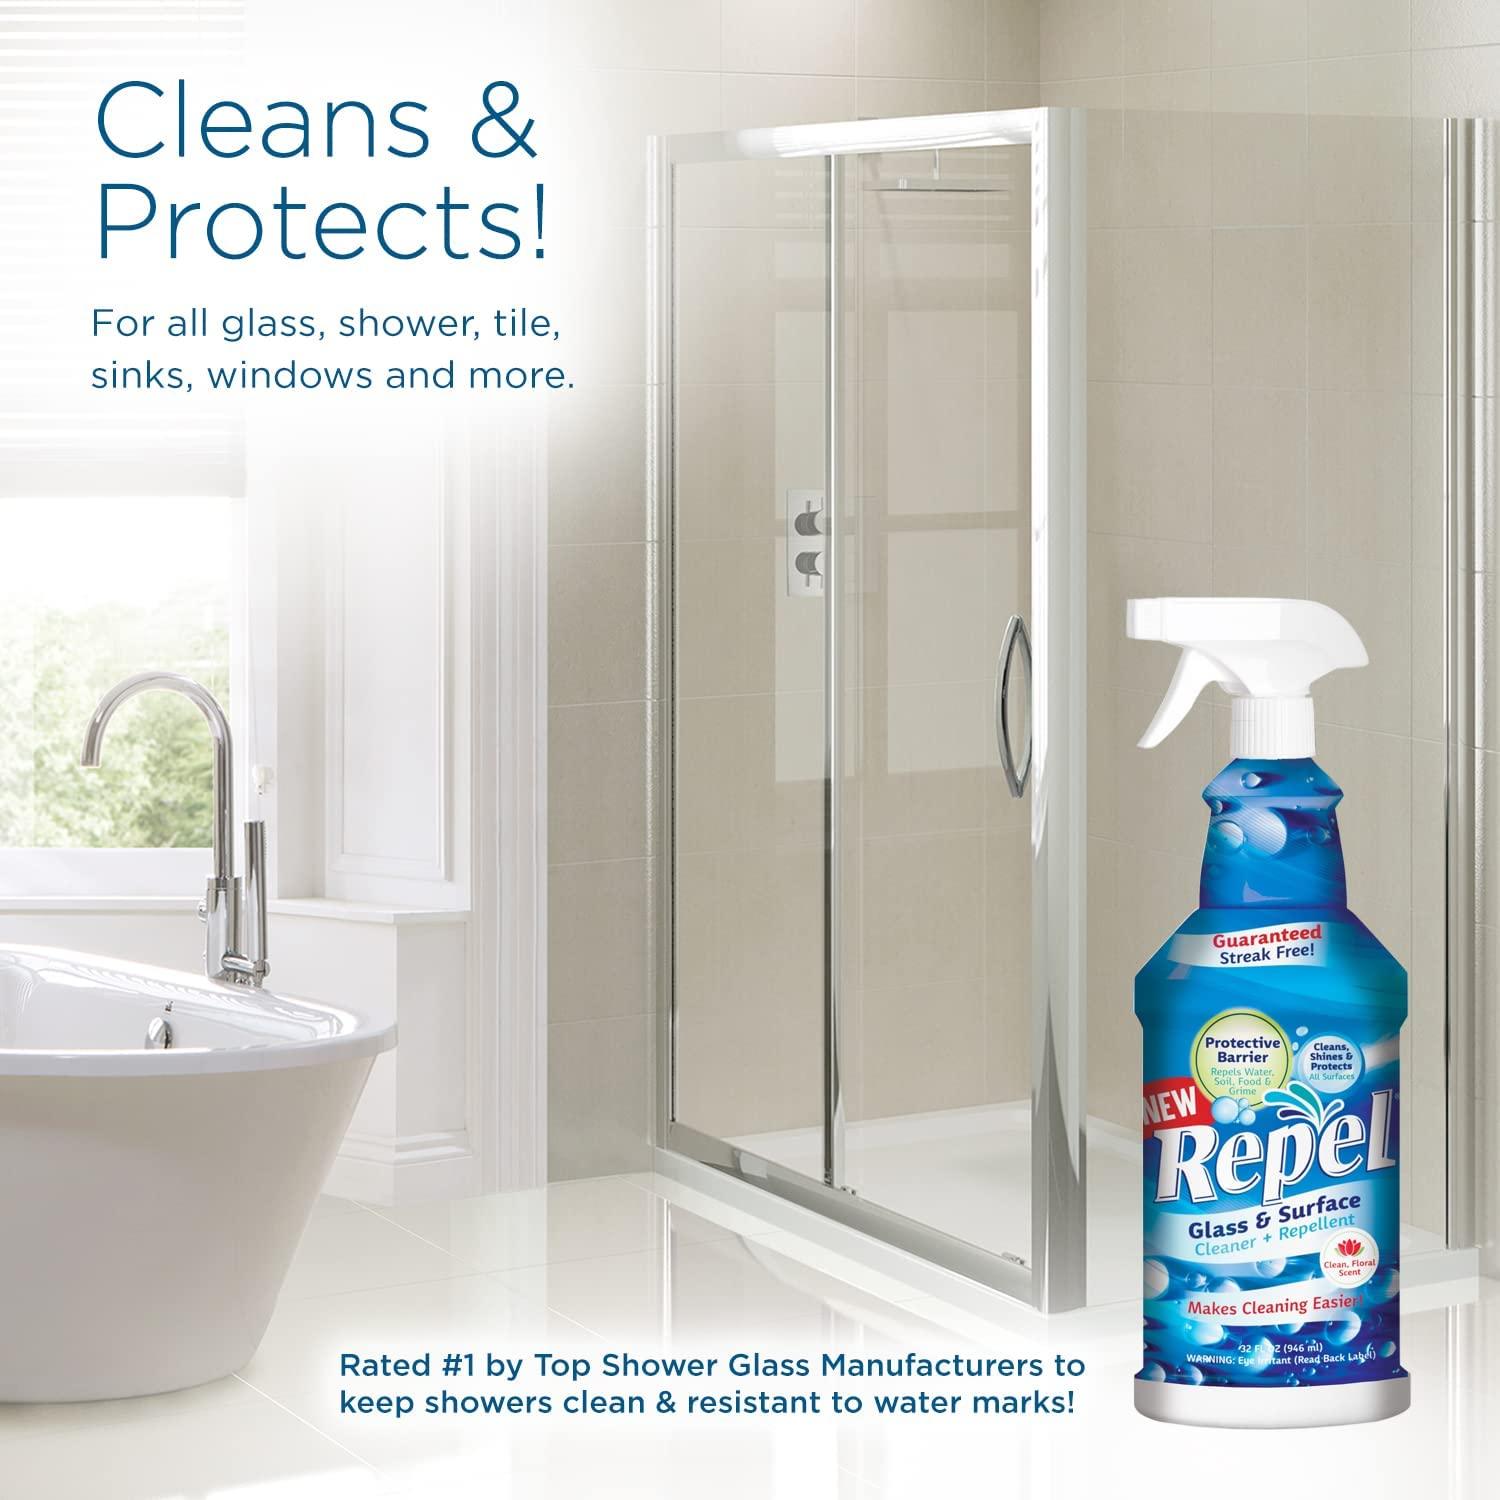 REPEL Glass & Surface Cleaner 32 fl. oz. - Cleans & Repels water